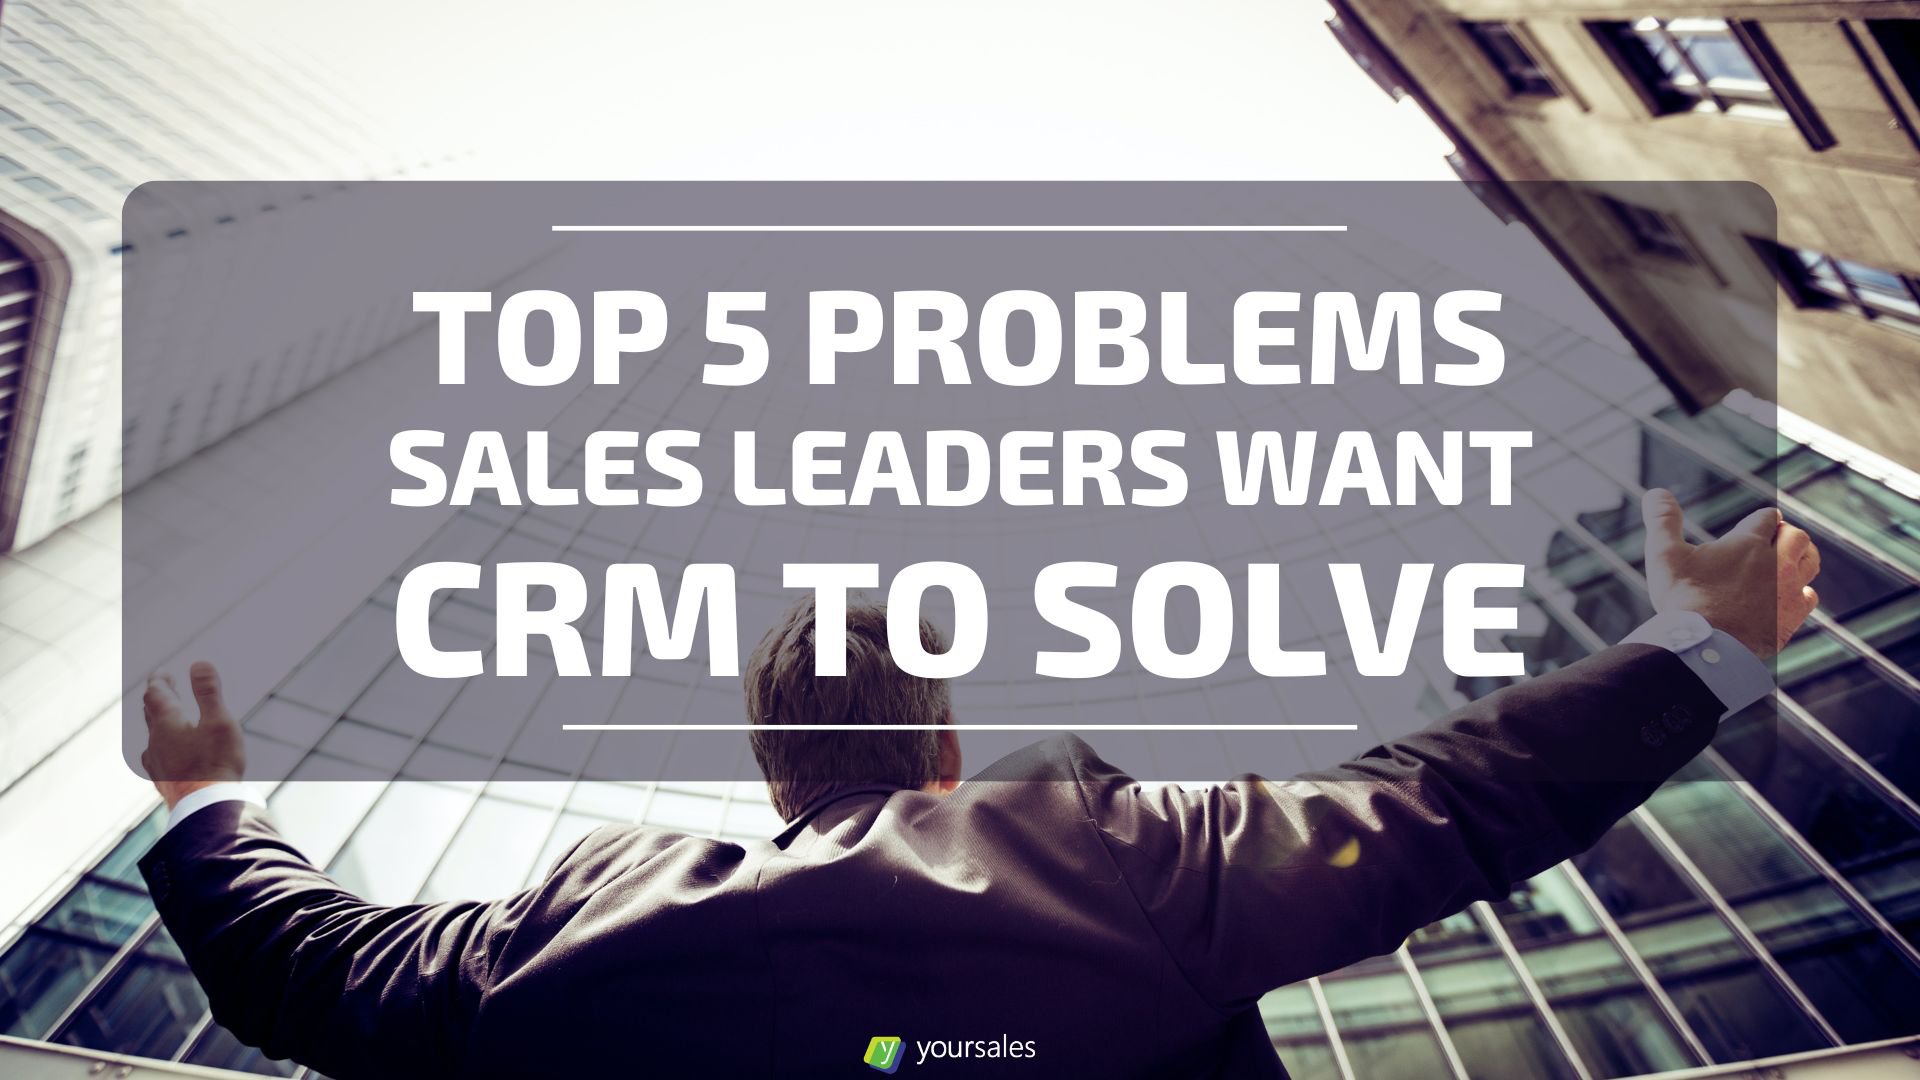 Featured image for “Top 5 Problems Sales Leaders Want CRM to Solve”